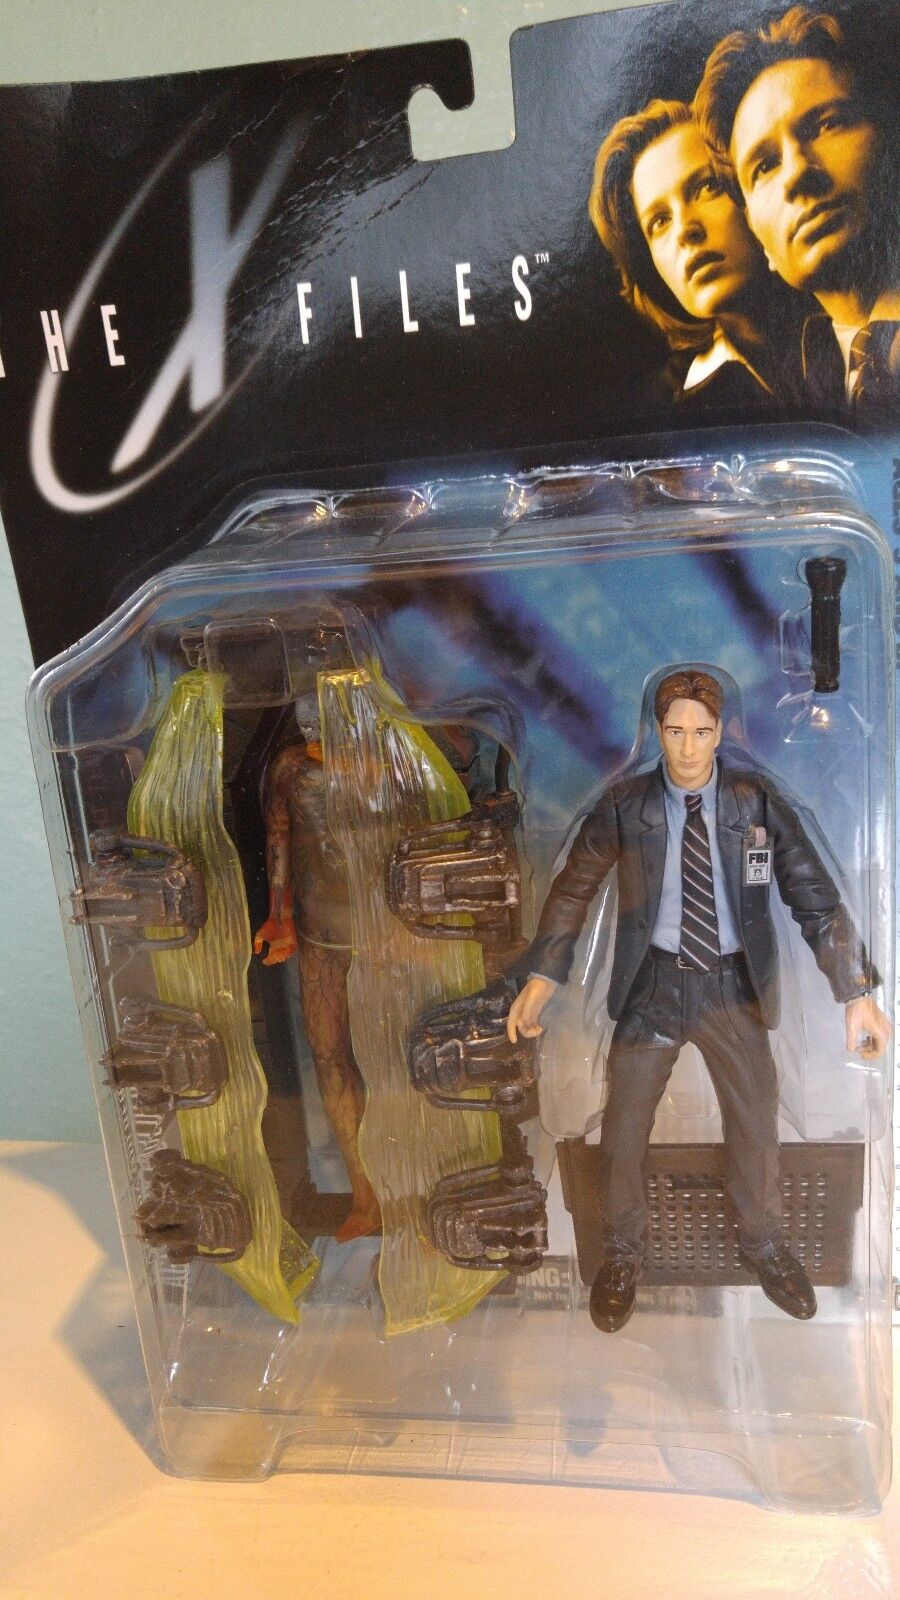 1998 McFarlane Toys The X-Files Series 1 Agent Fox Mulder and Agent Dana Scully Без бренда - фотография #7